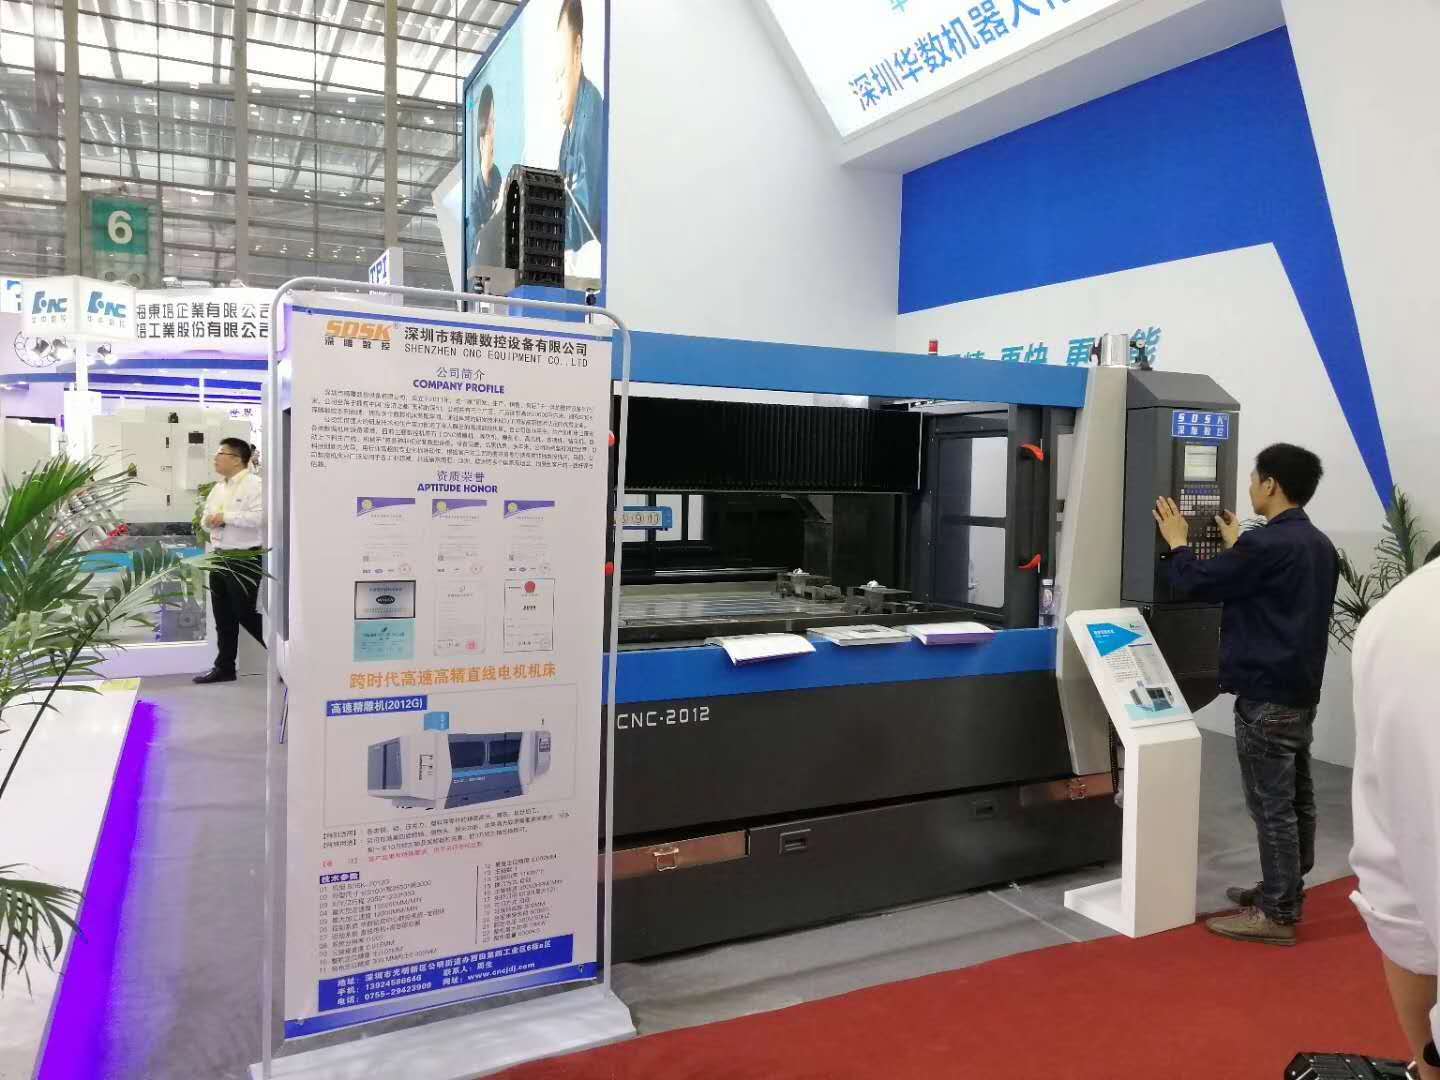 2019 Deep Sculpture CNC Joins Hands with Huashu Robotics/Exhibition/Magnetic Suspension Linear Motor Machine Tool